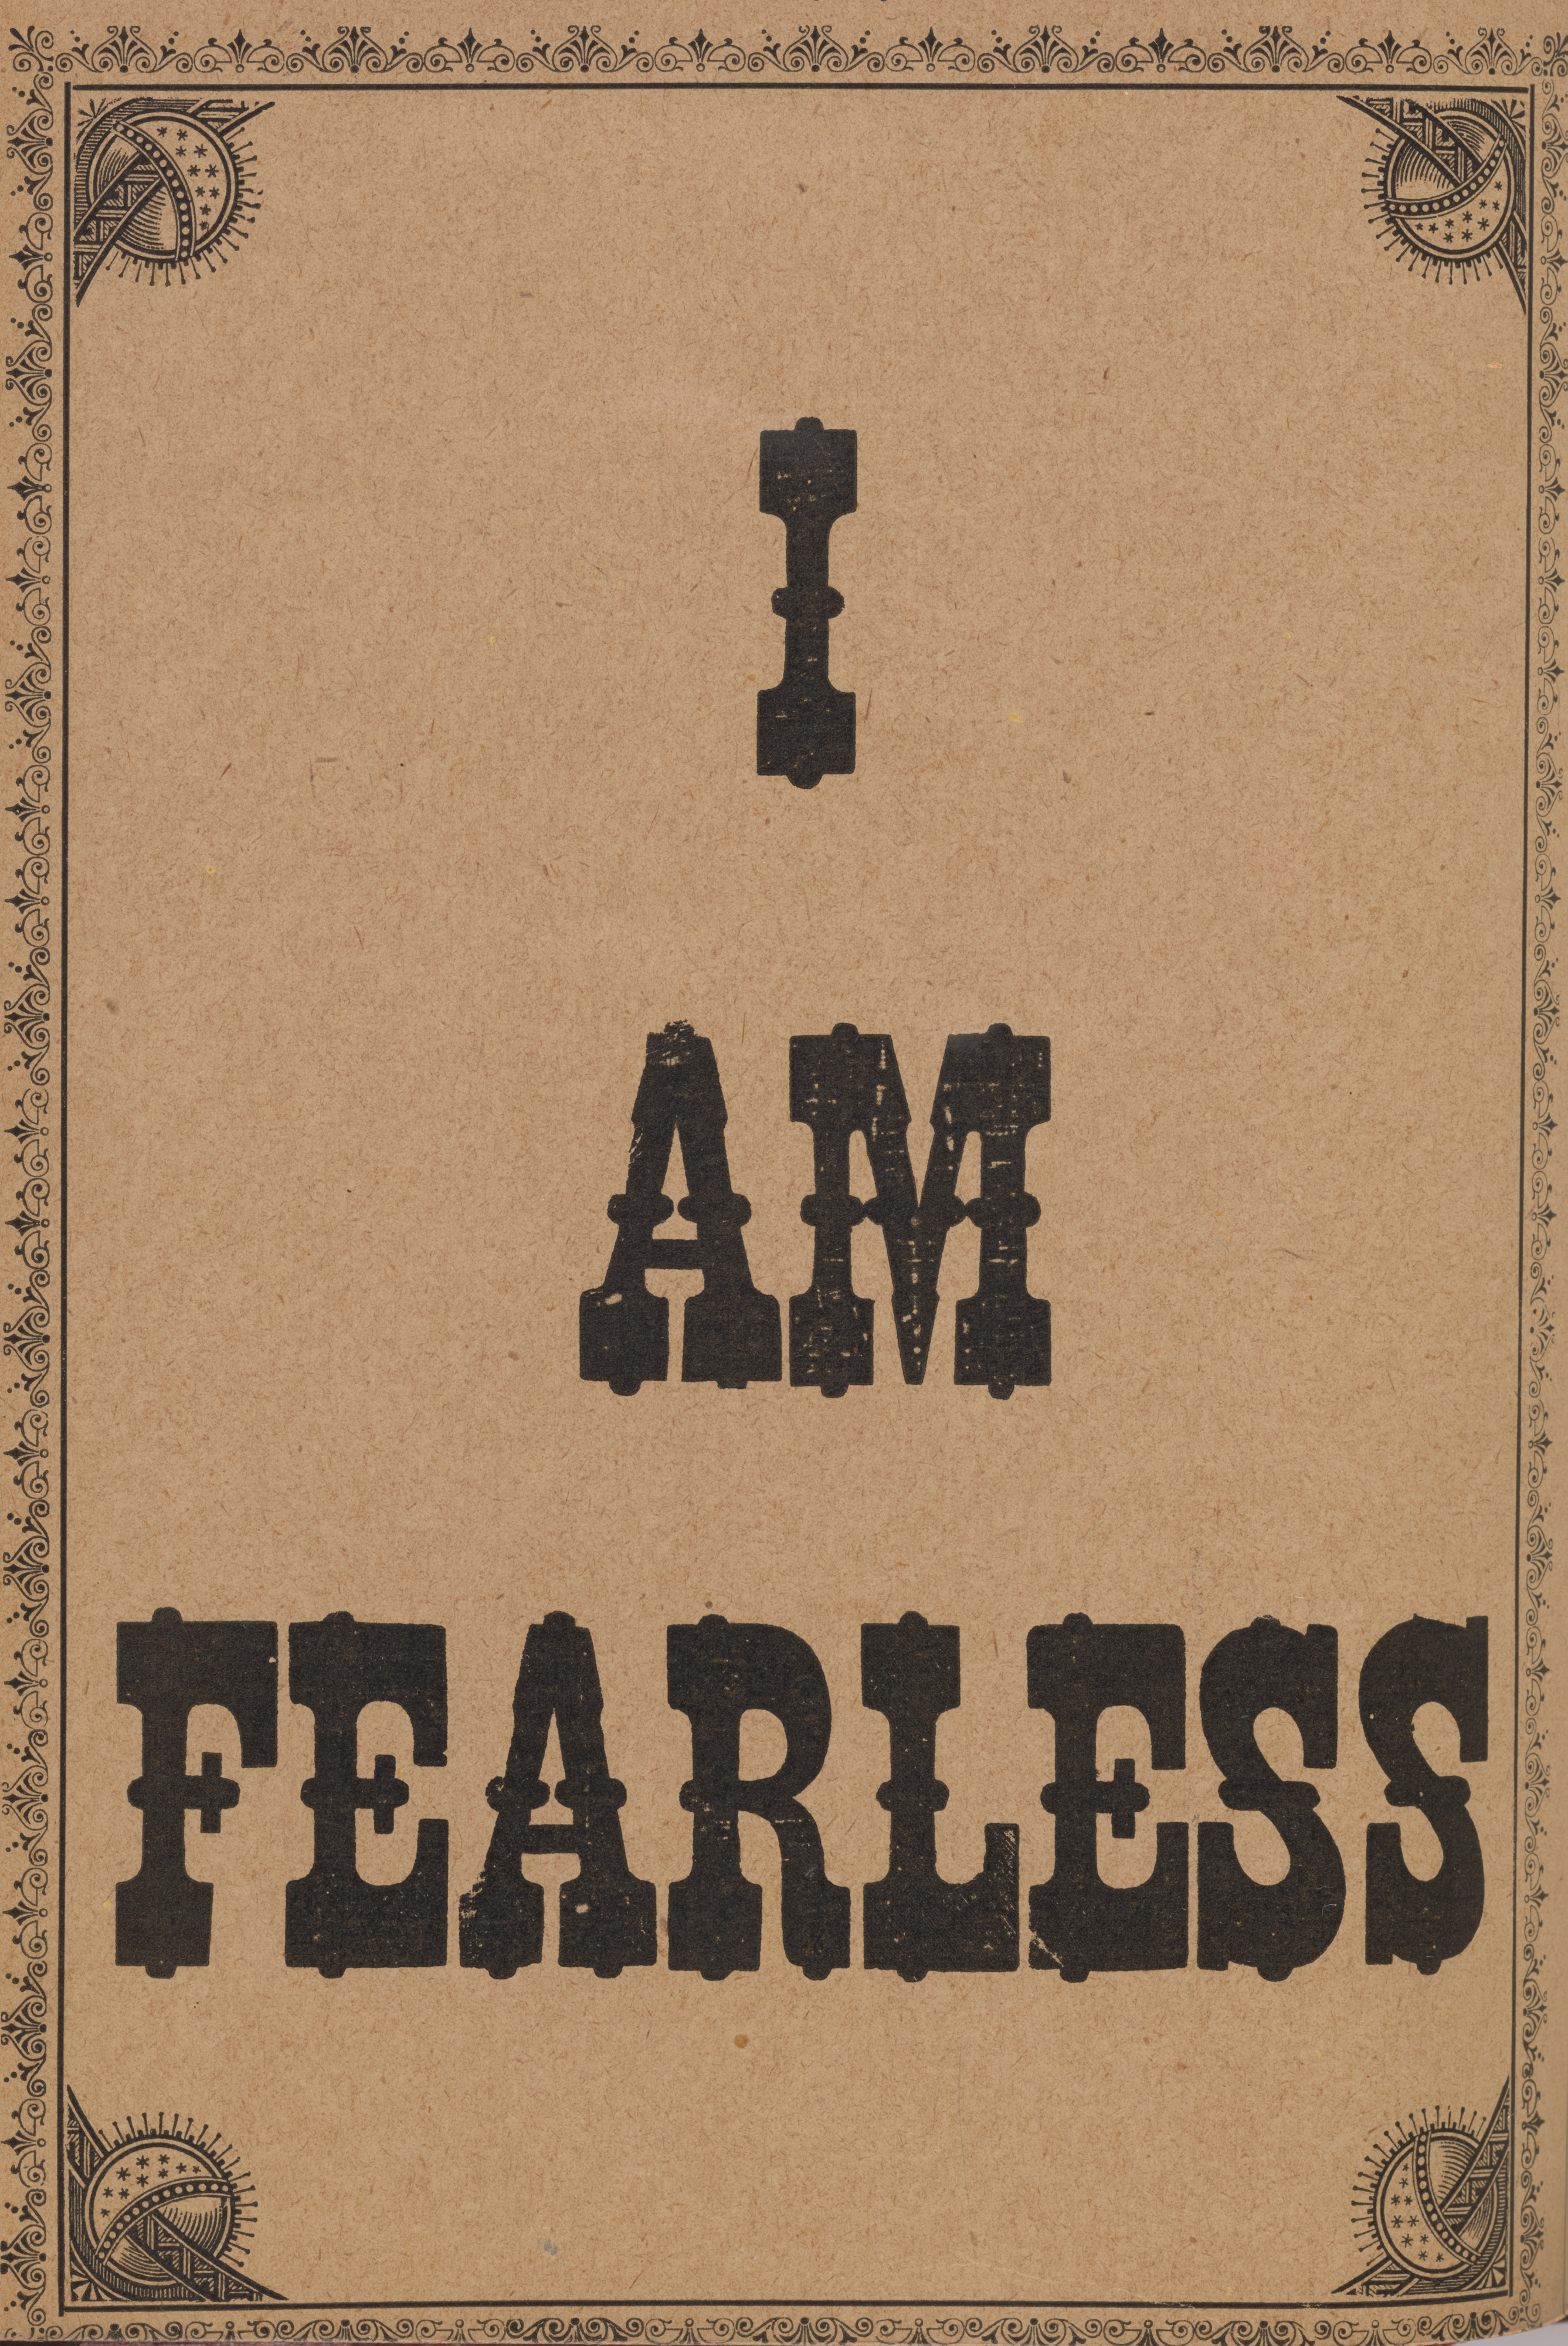 'I am fearless', Inspirational sayings from Progressive Thought magazine